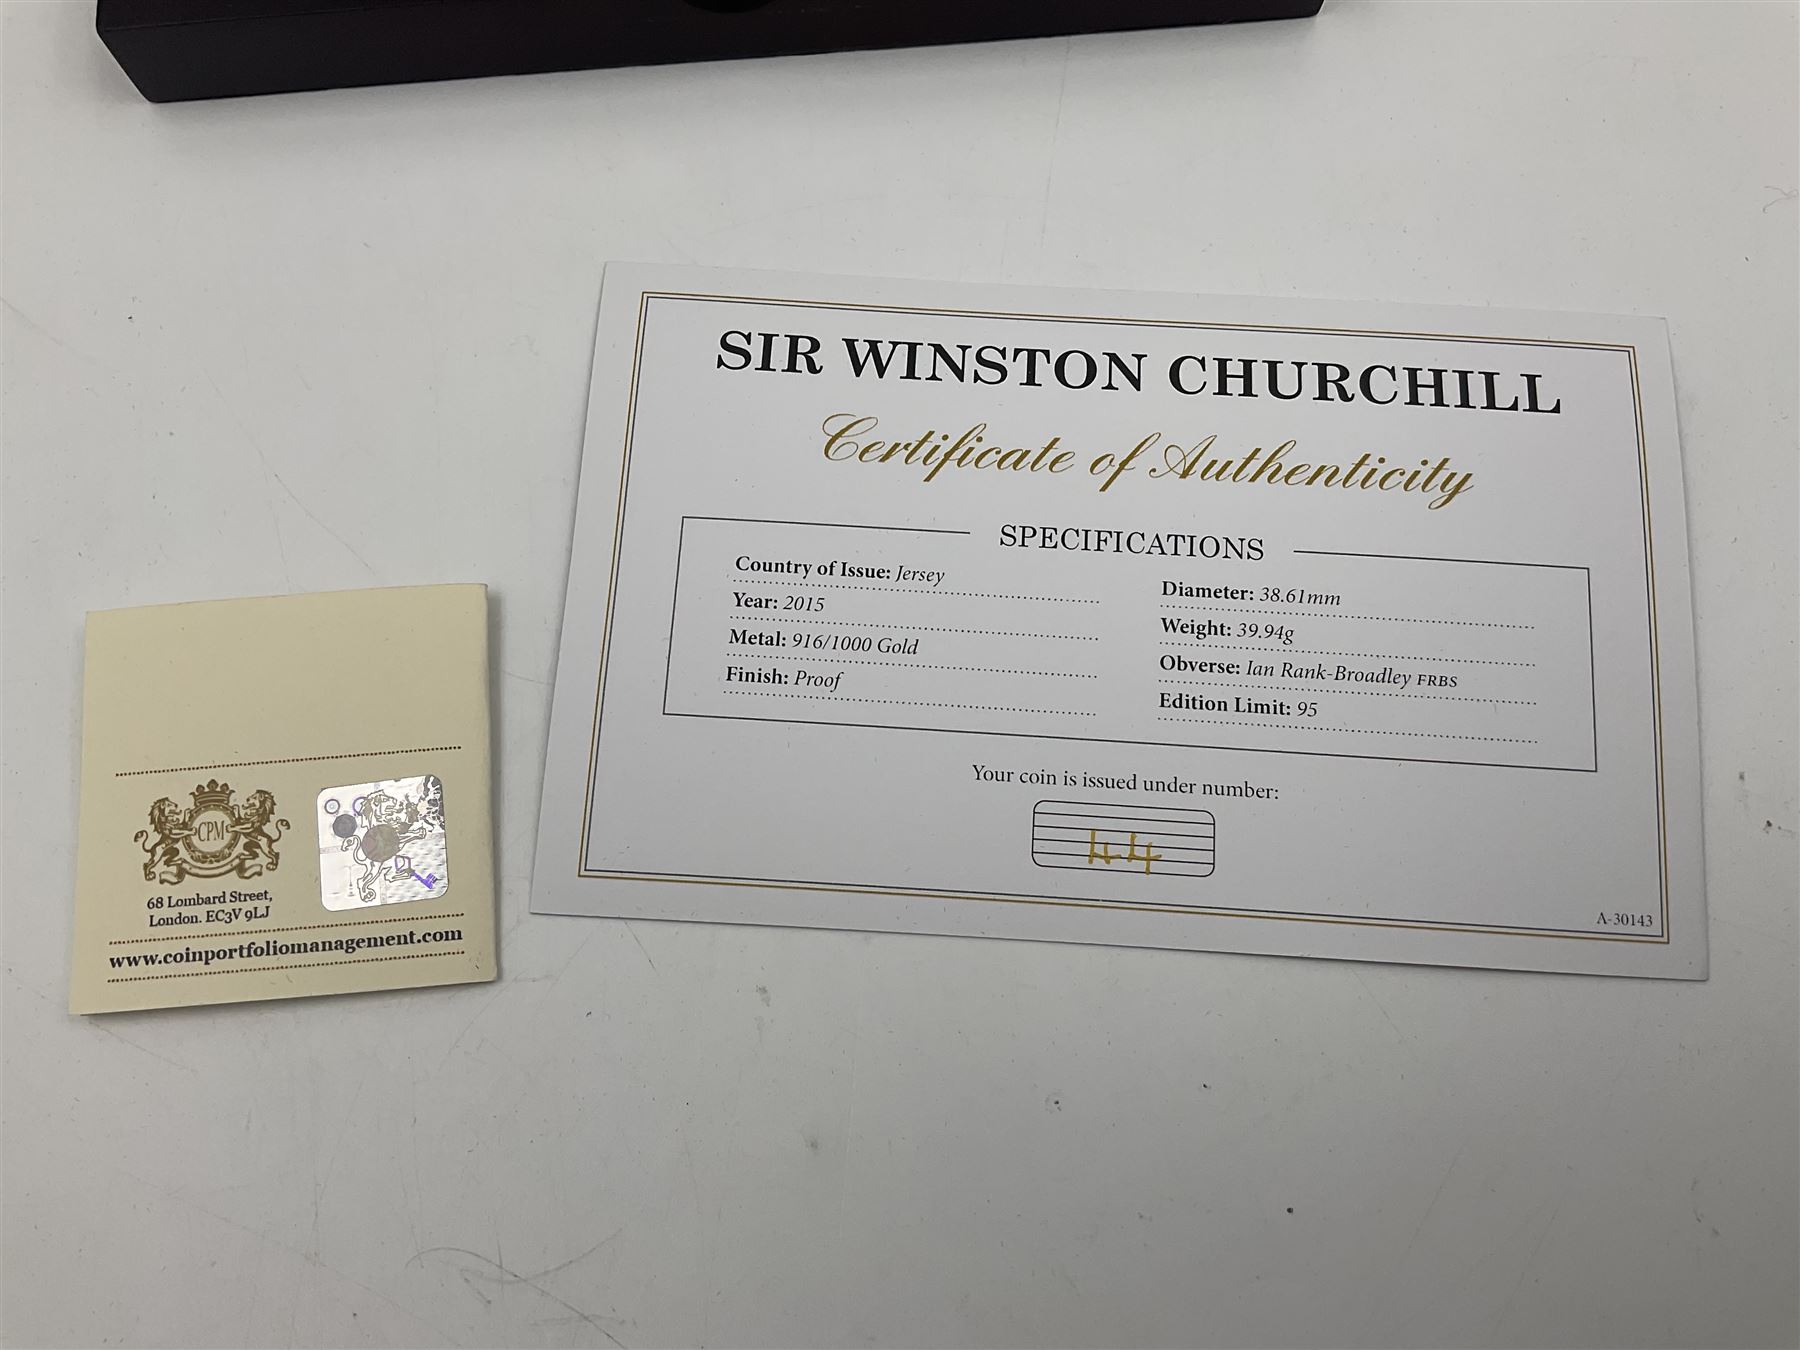 Queen Elizabeth II Bailiwick of Jersey 2015 'Sir Winston Churchill' gold proof five pound coin - Image 5 of 6